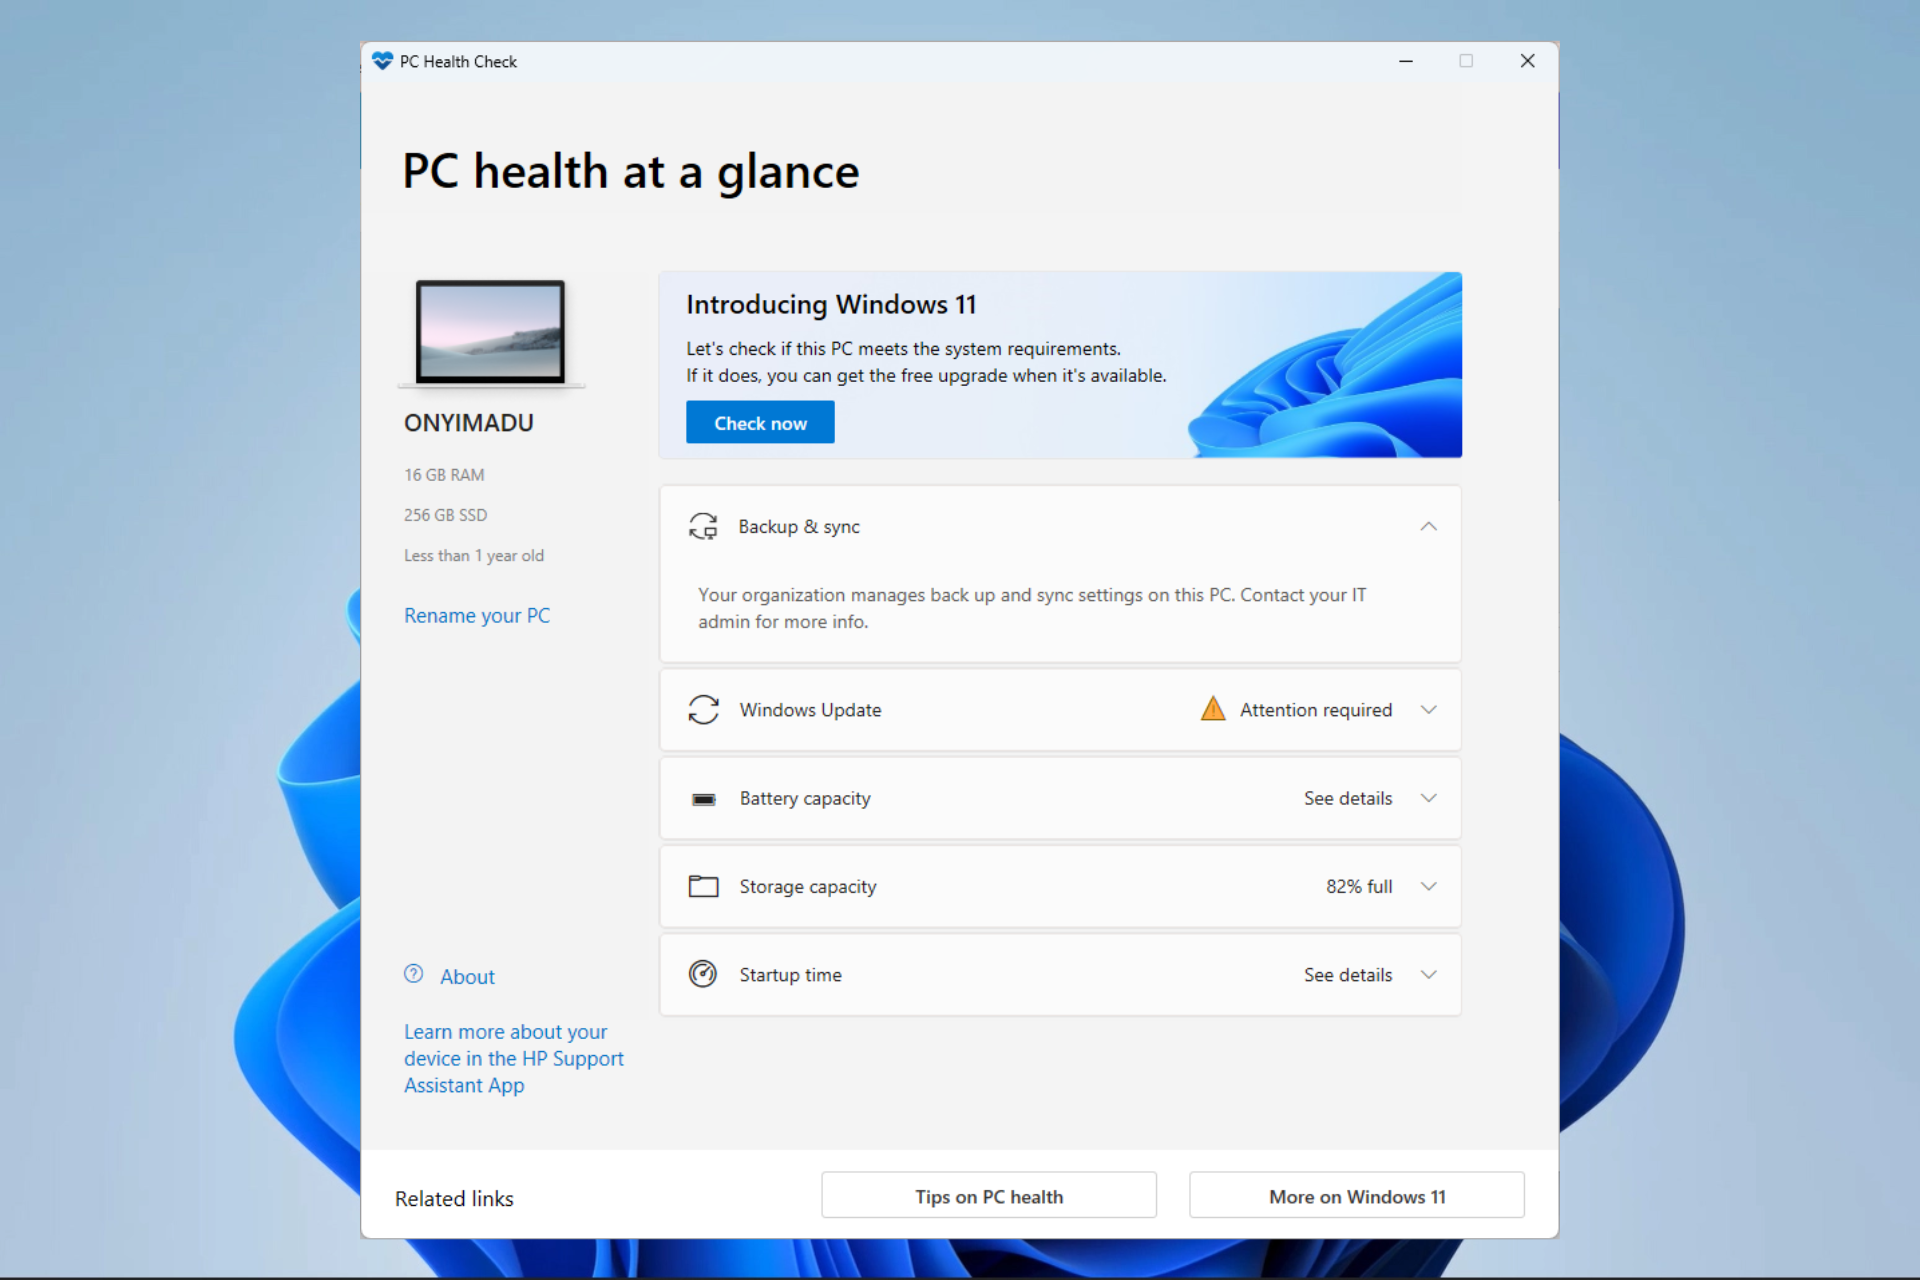 How to download pc health check app in windows 10